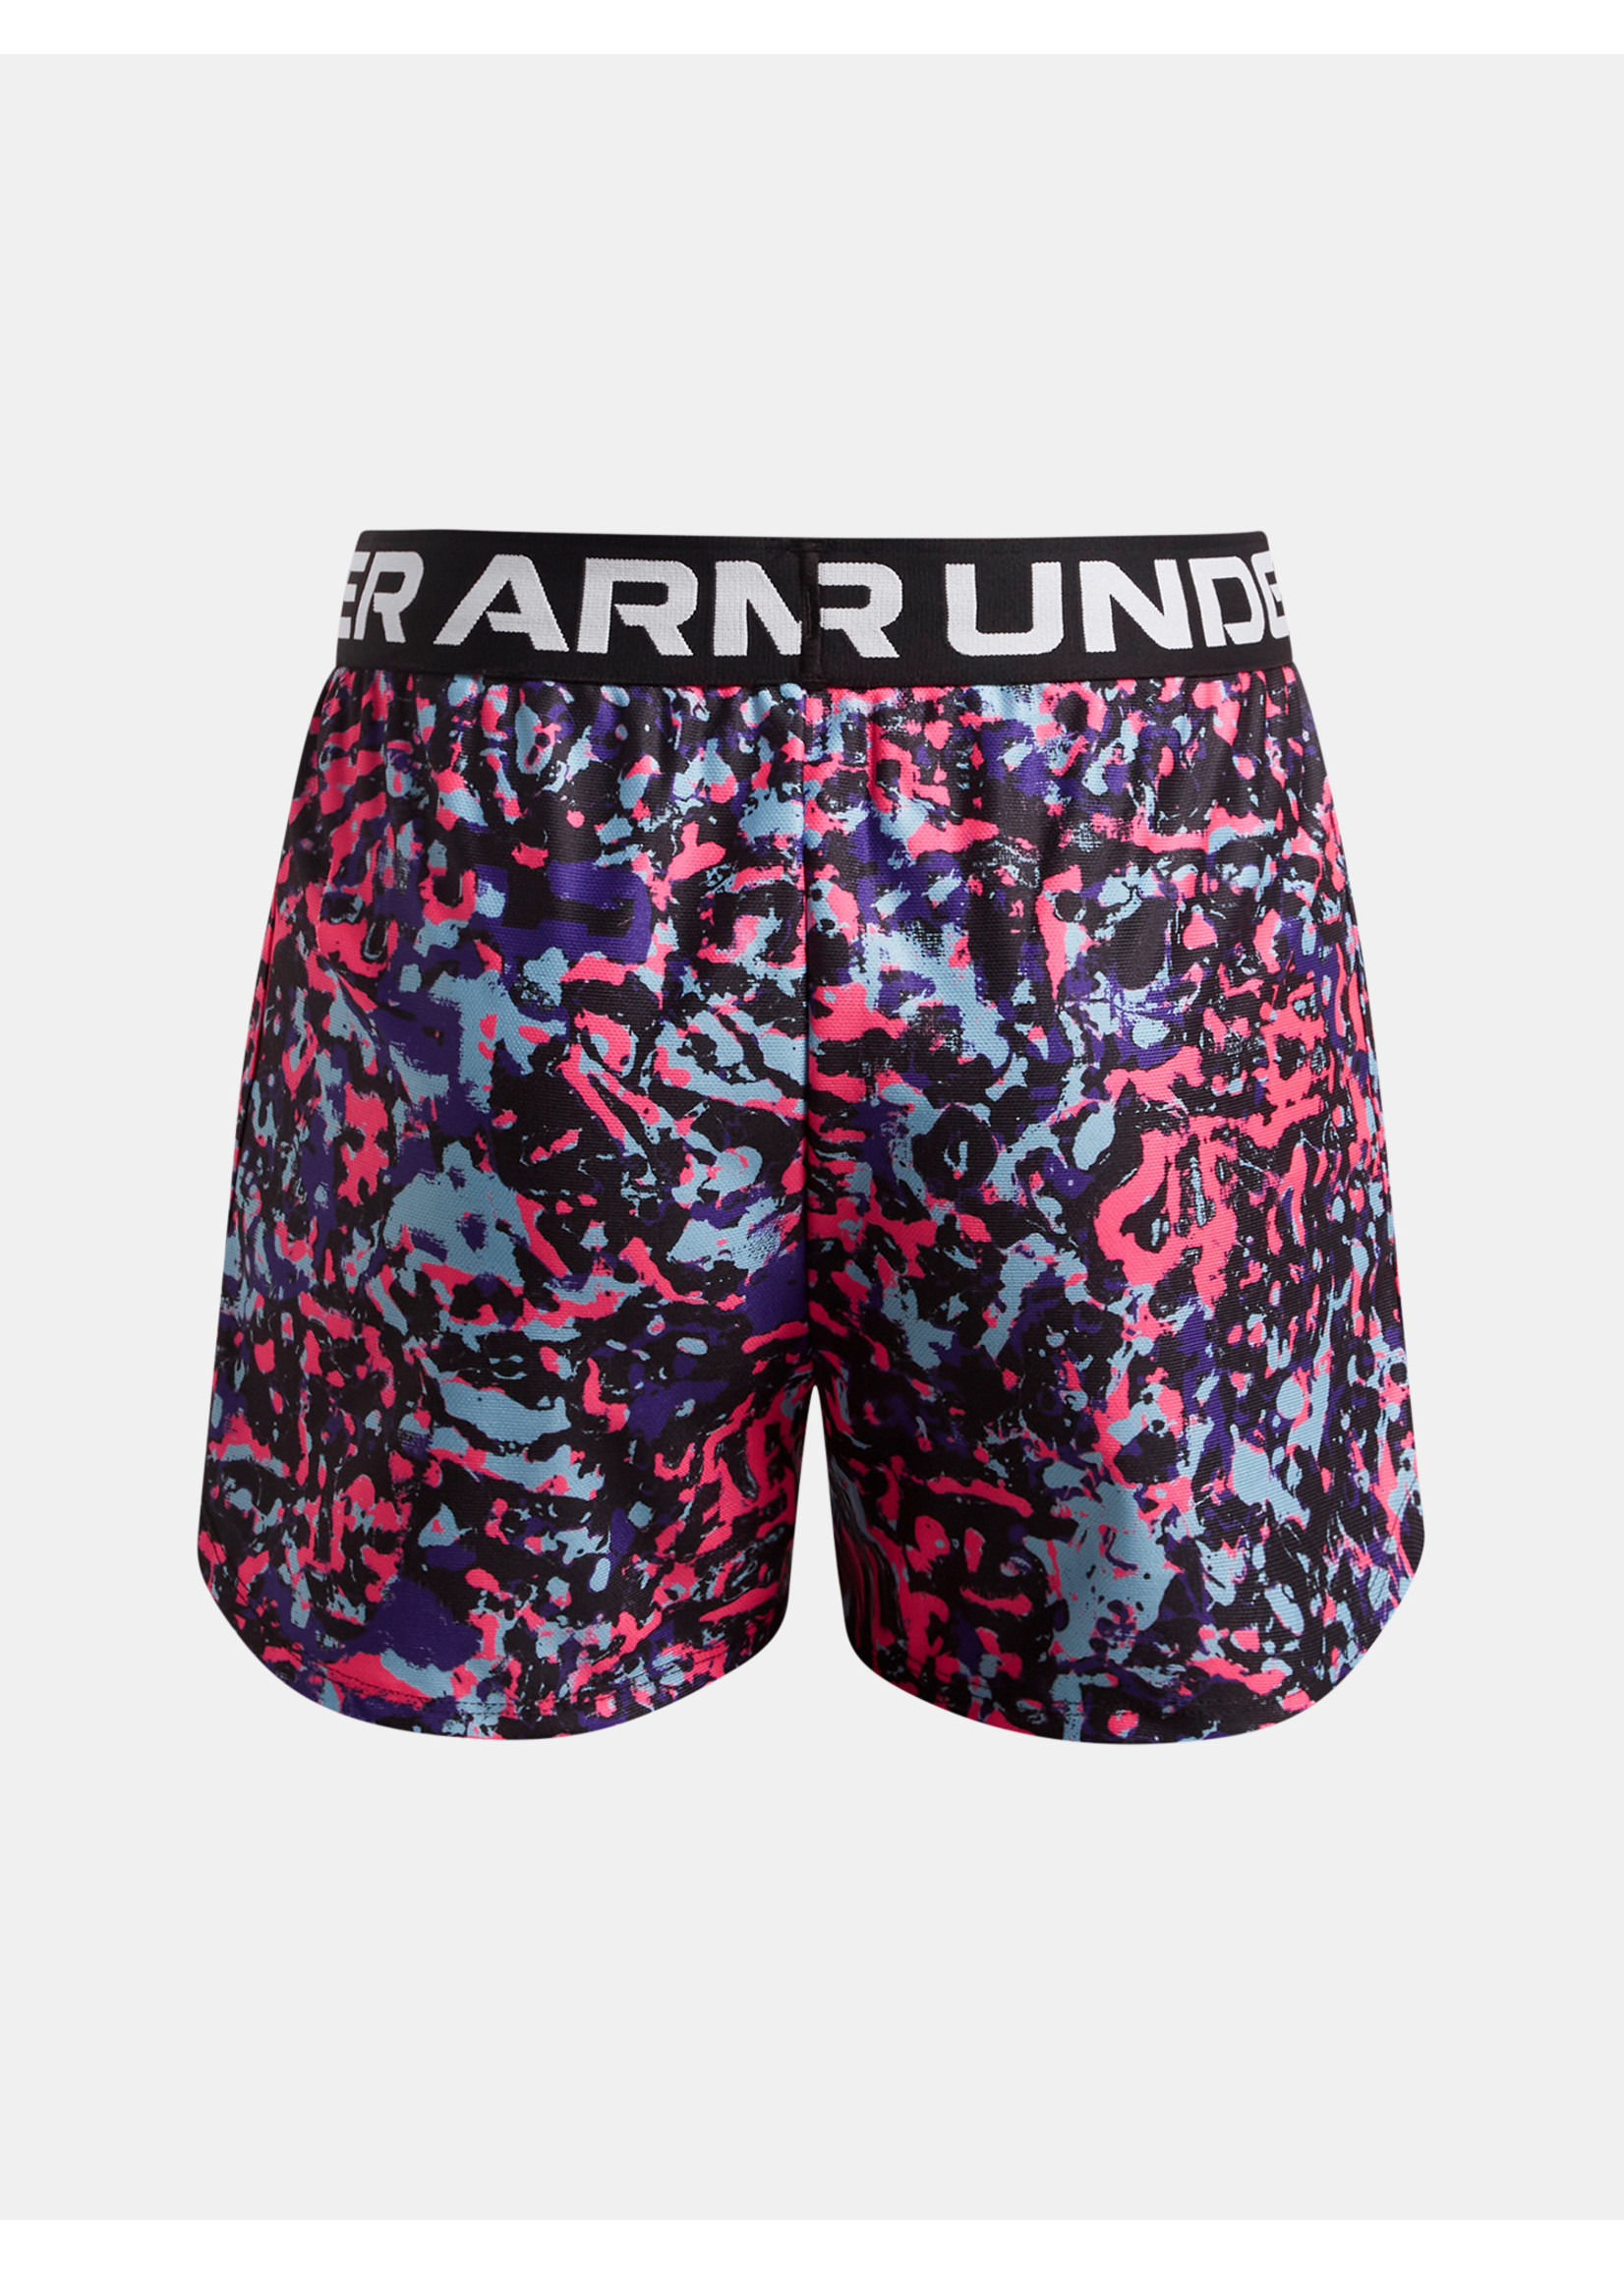 UNDER ARMOUR Girls' UA Play Up Printed Shorts